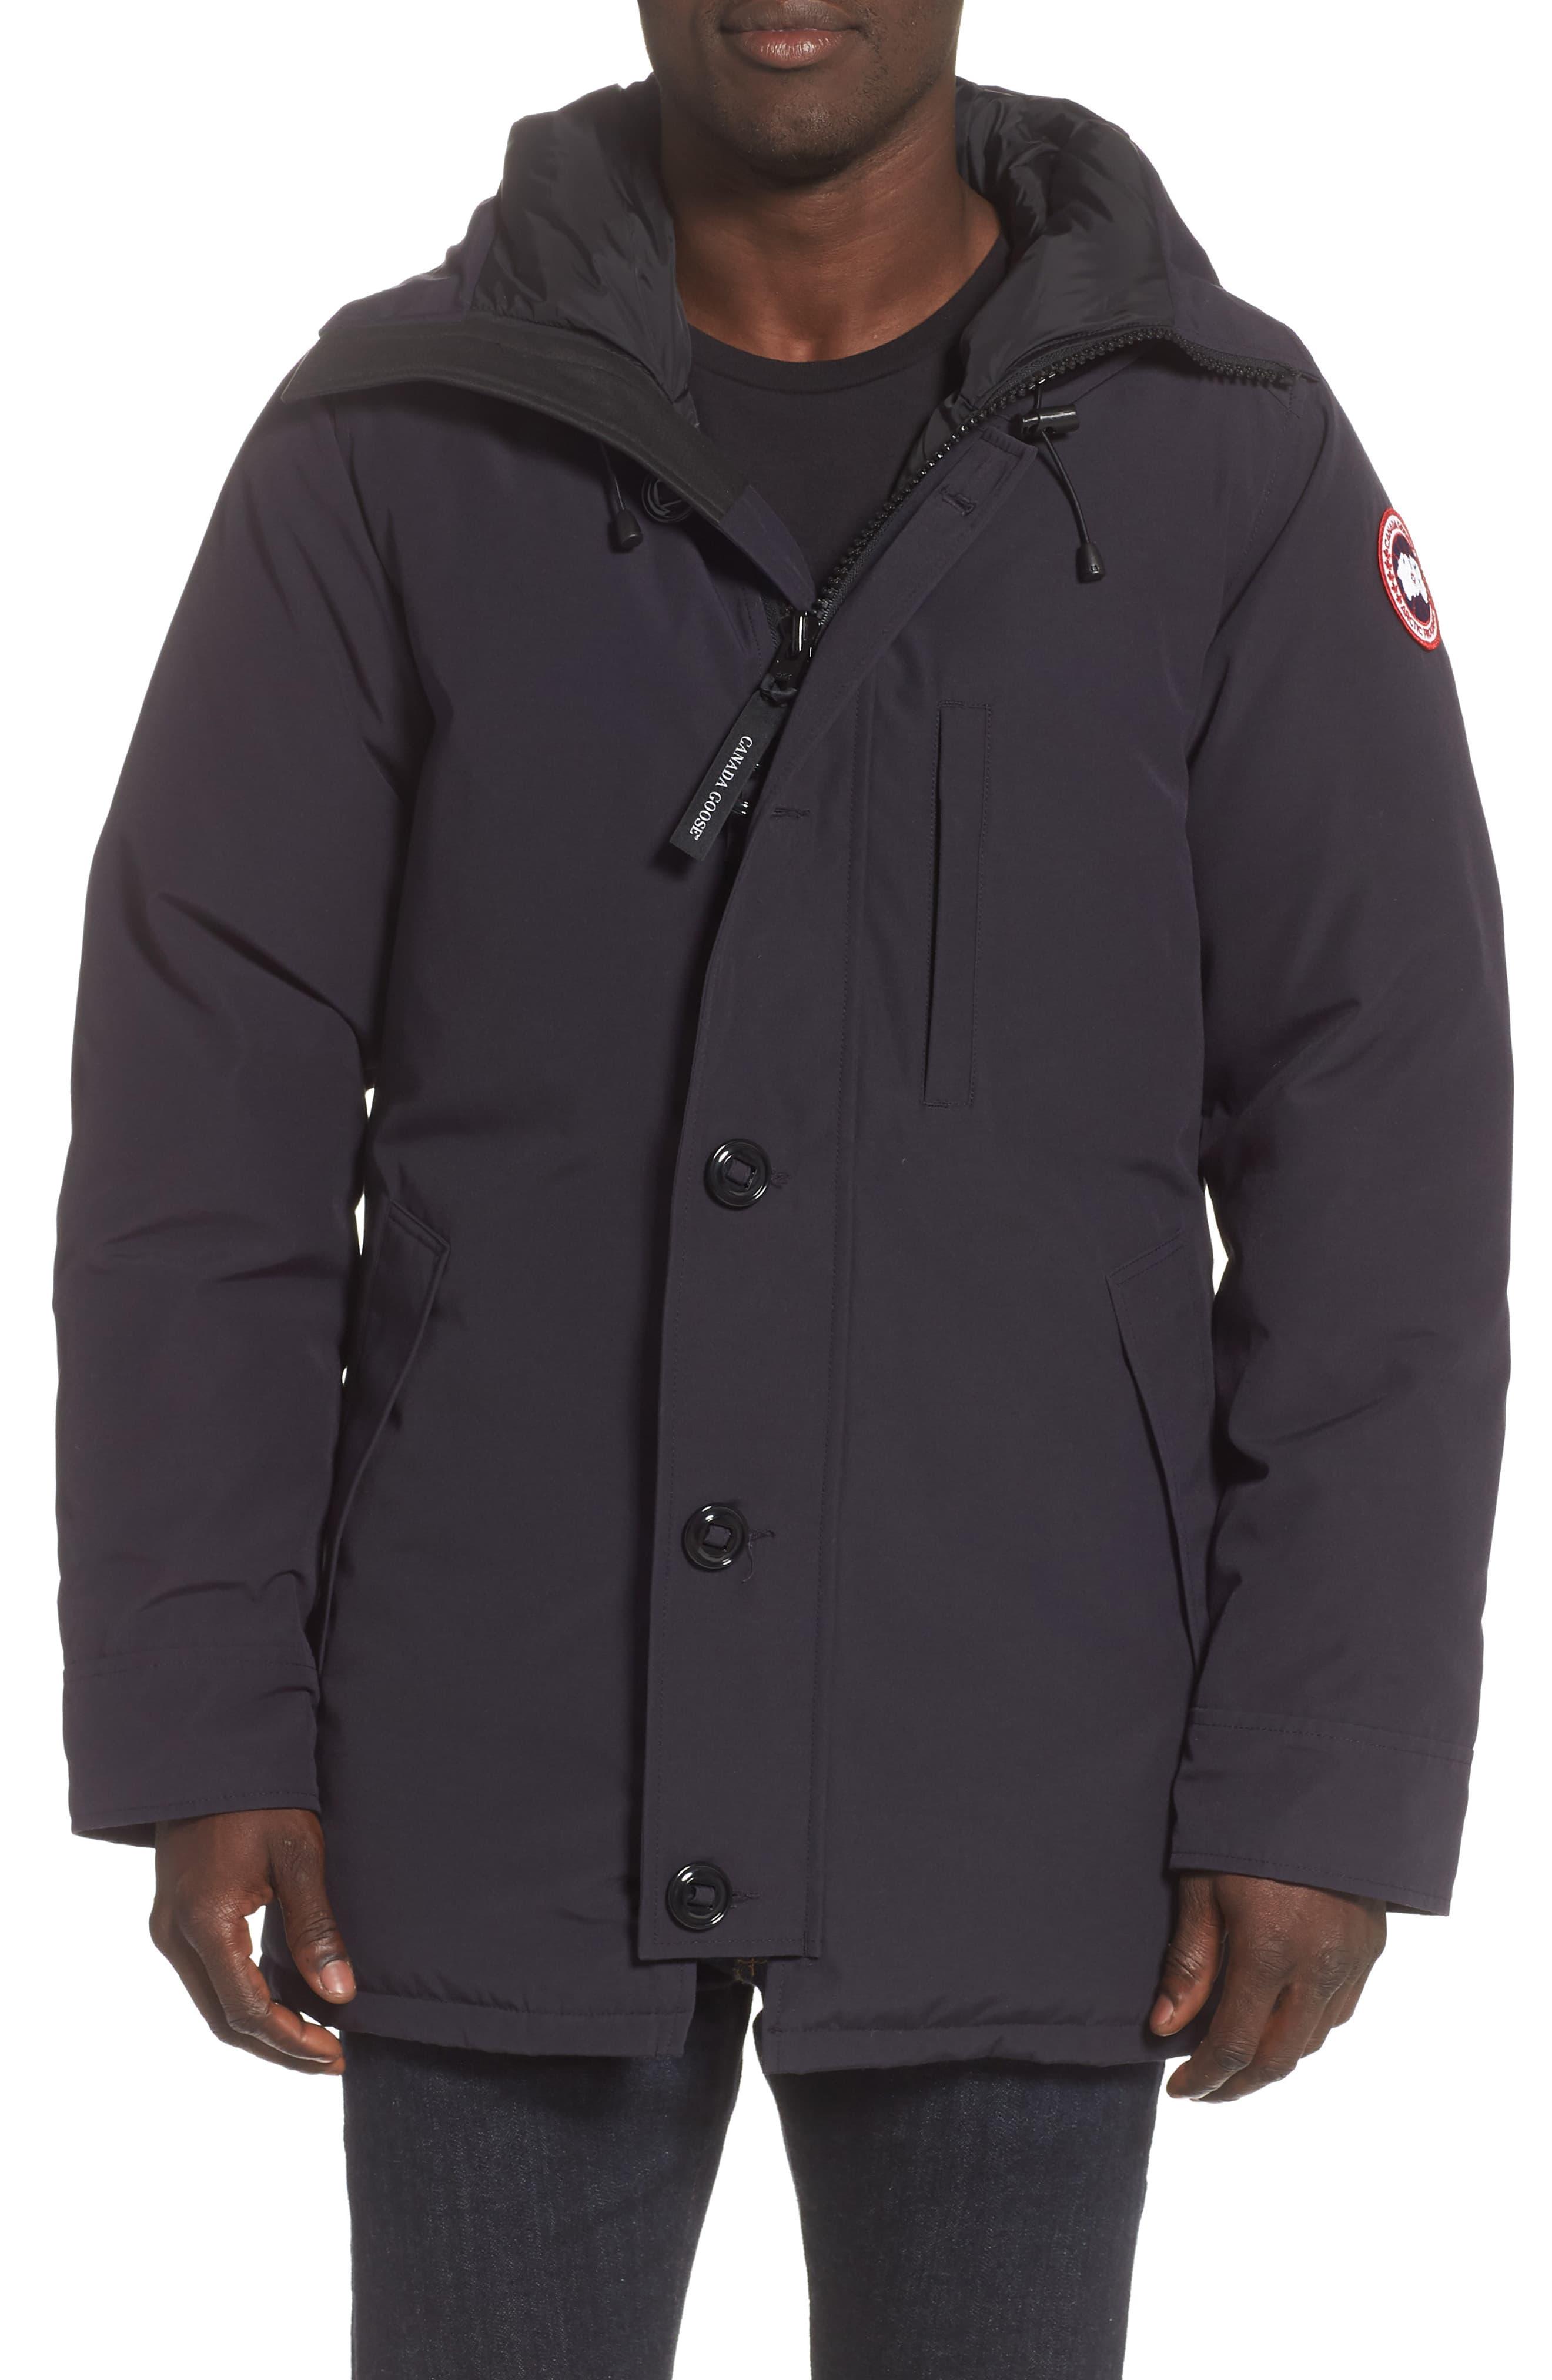 Canada Goose Chateau Slim Fit Down Parka in Blue for Men - Lyst